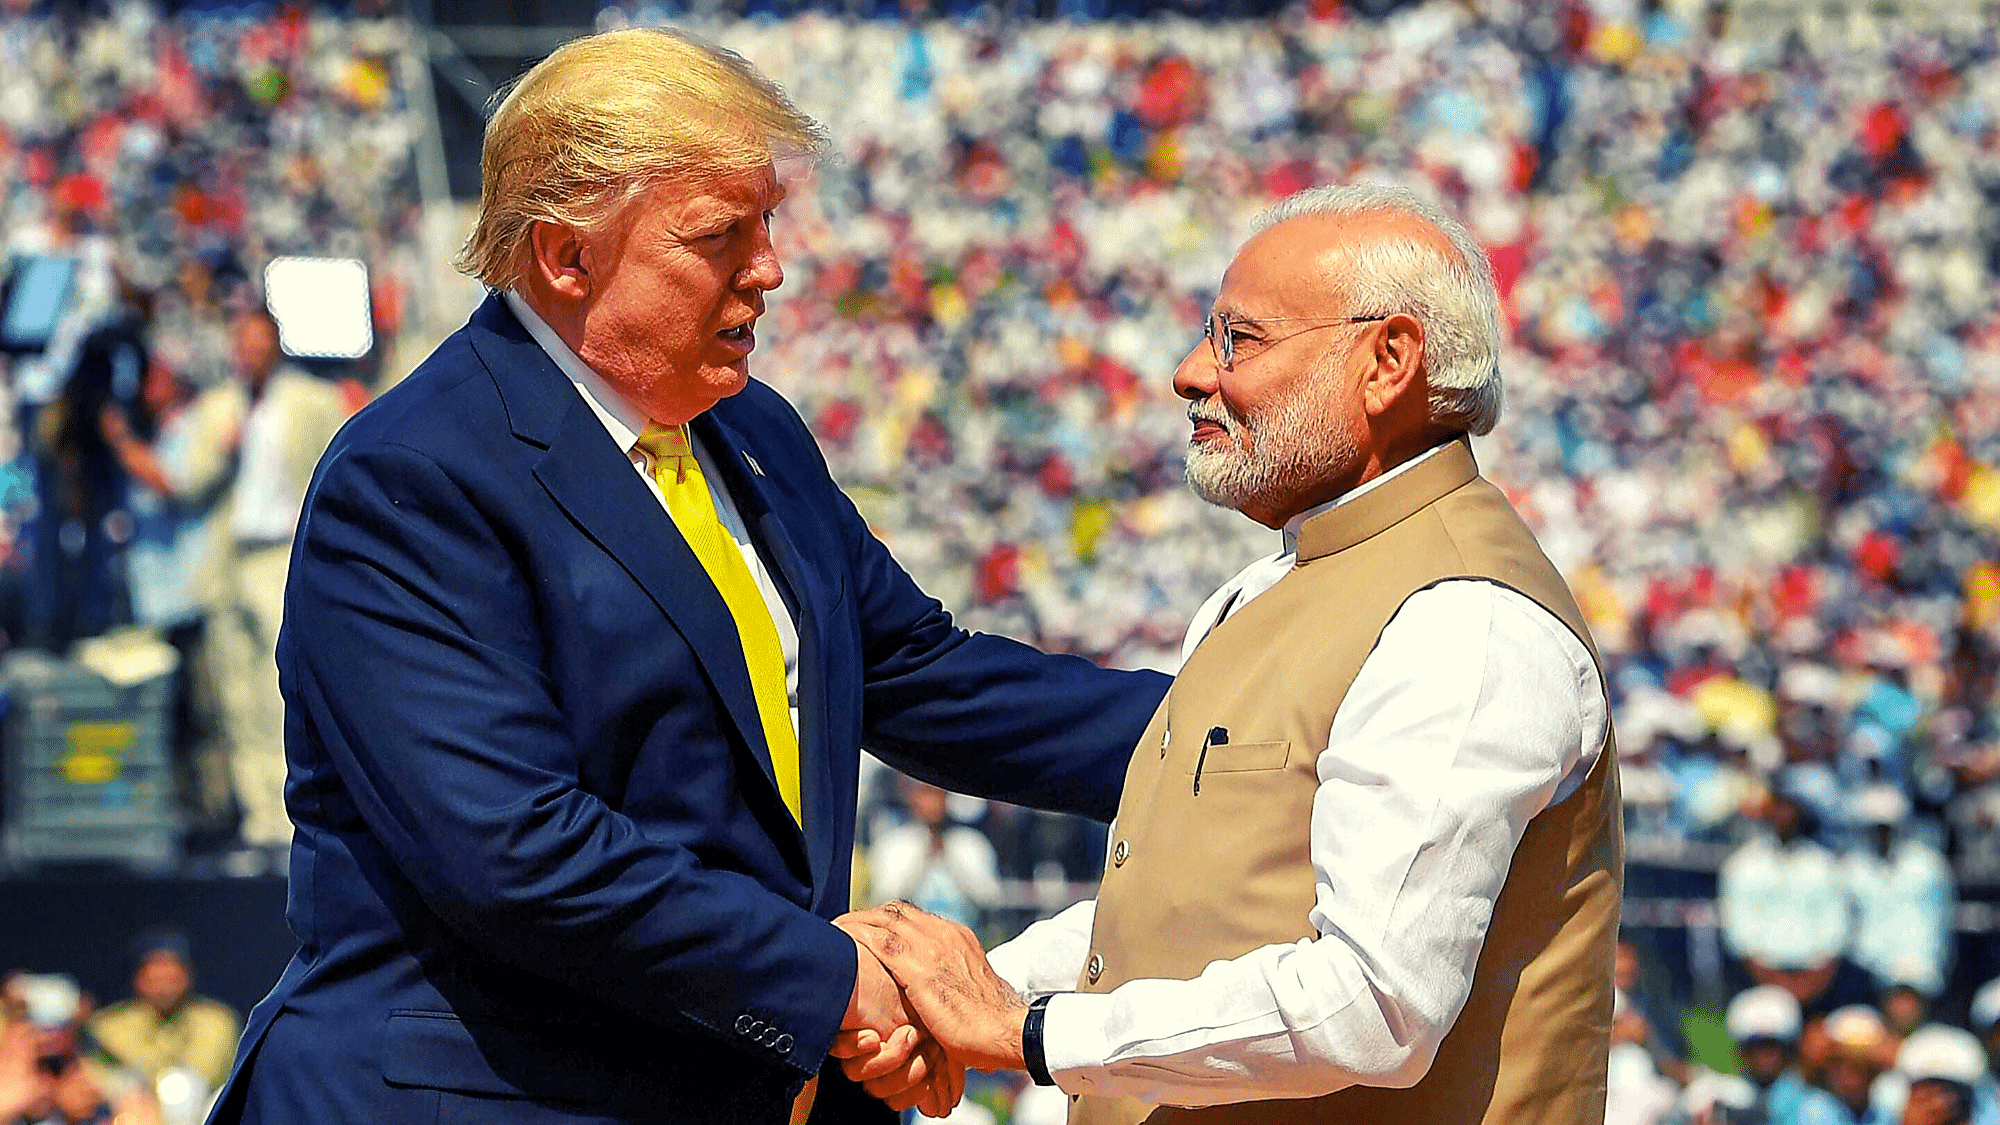 Can the grand spectacle in India translate into any meaningful electoral gains for the incumbent US President?